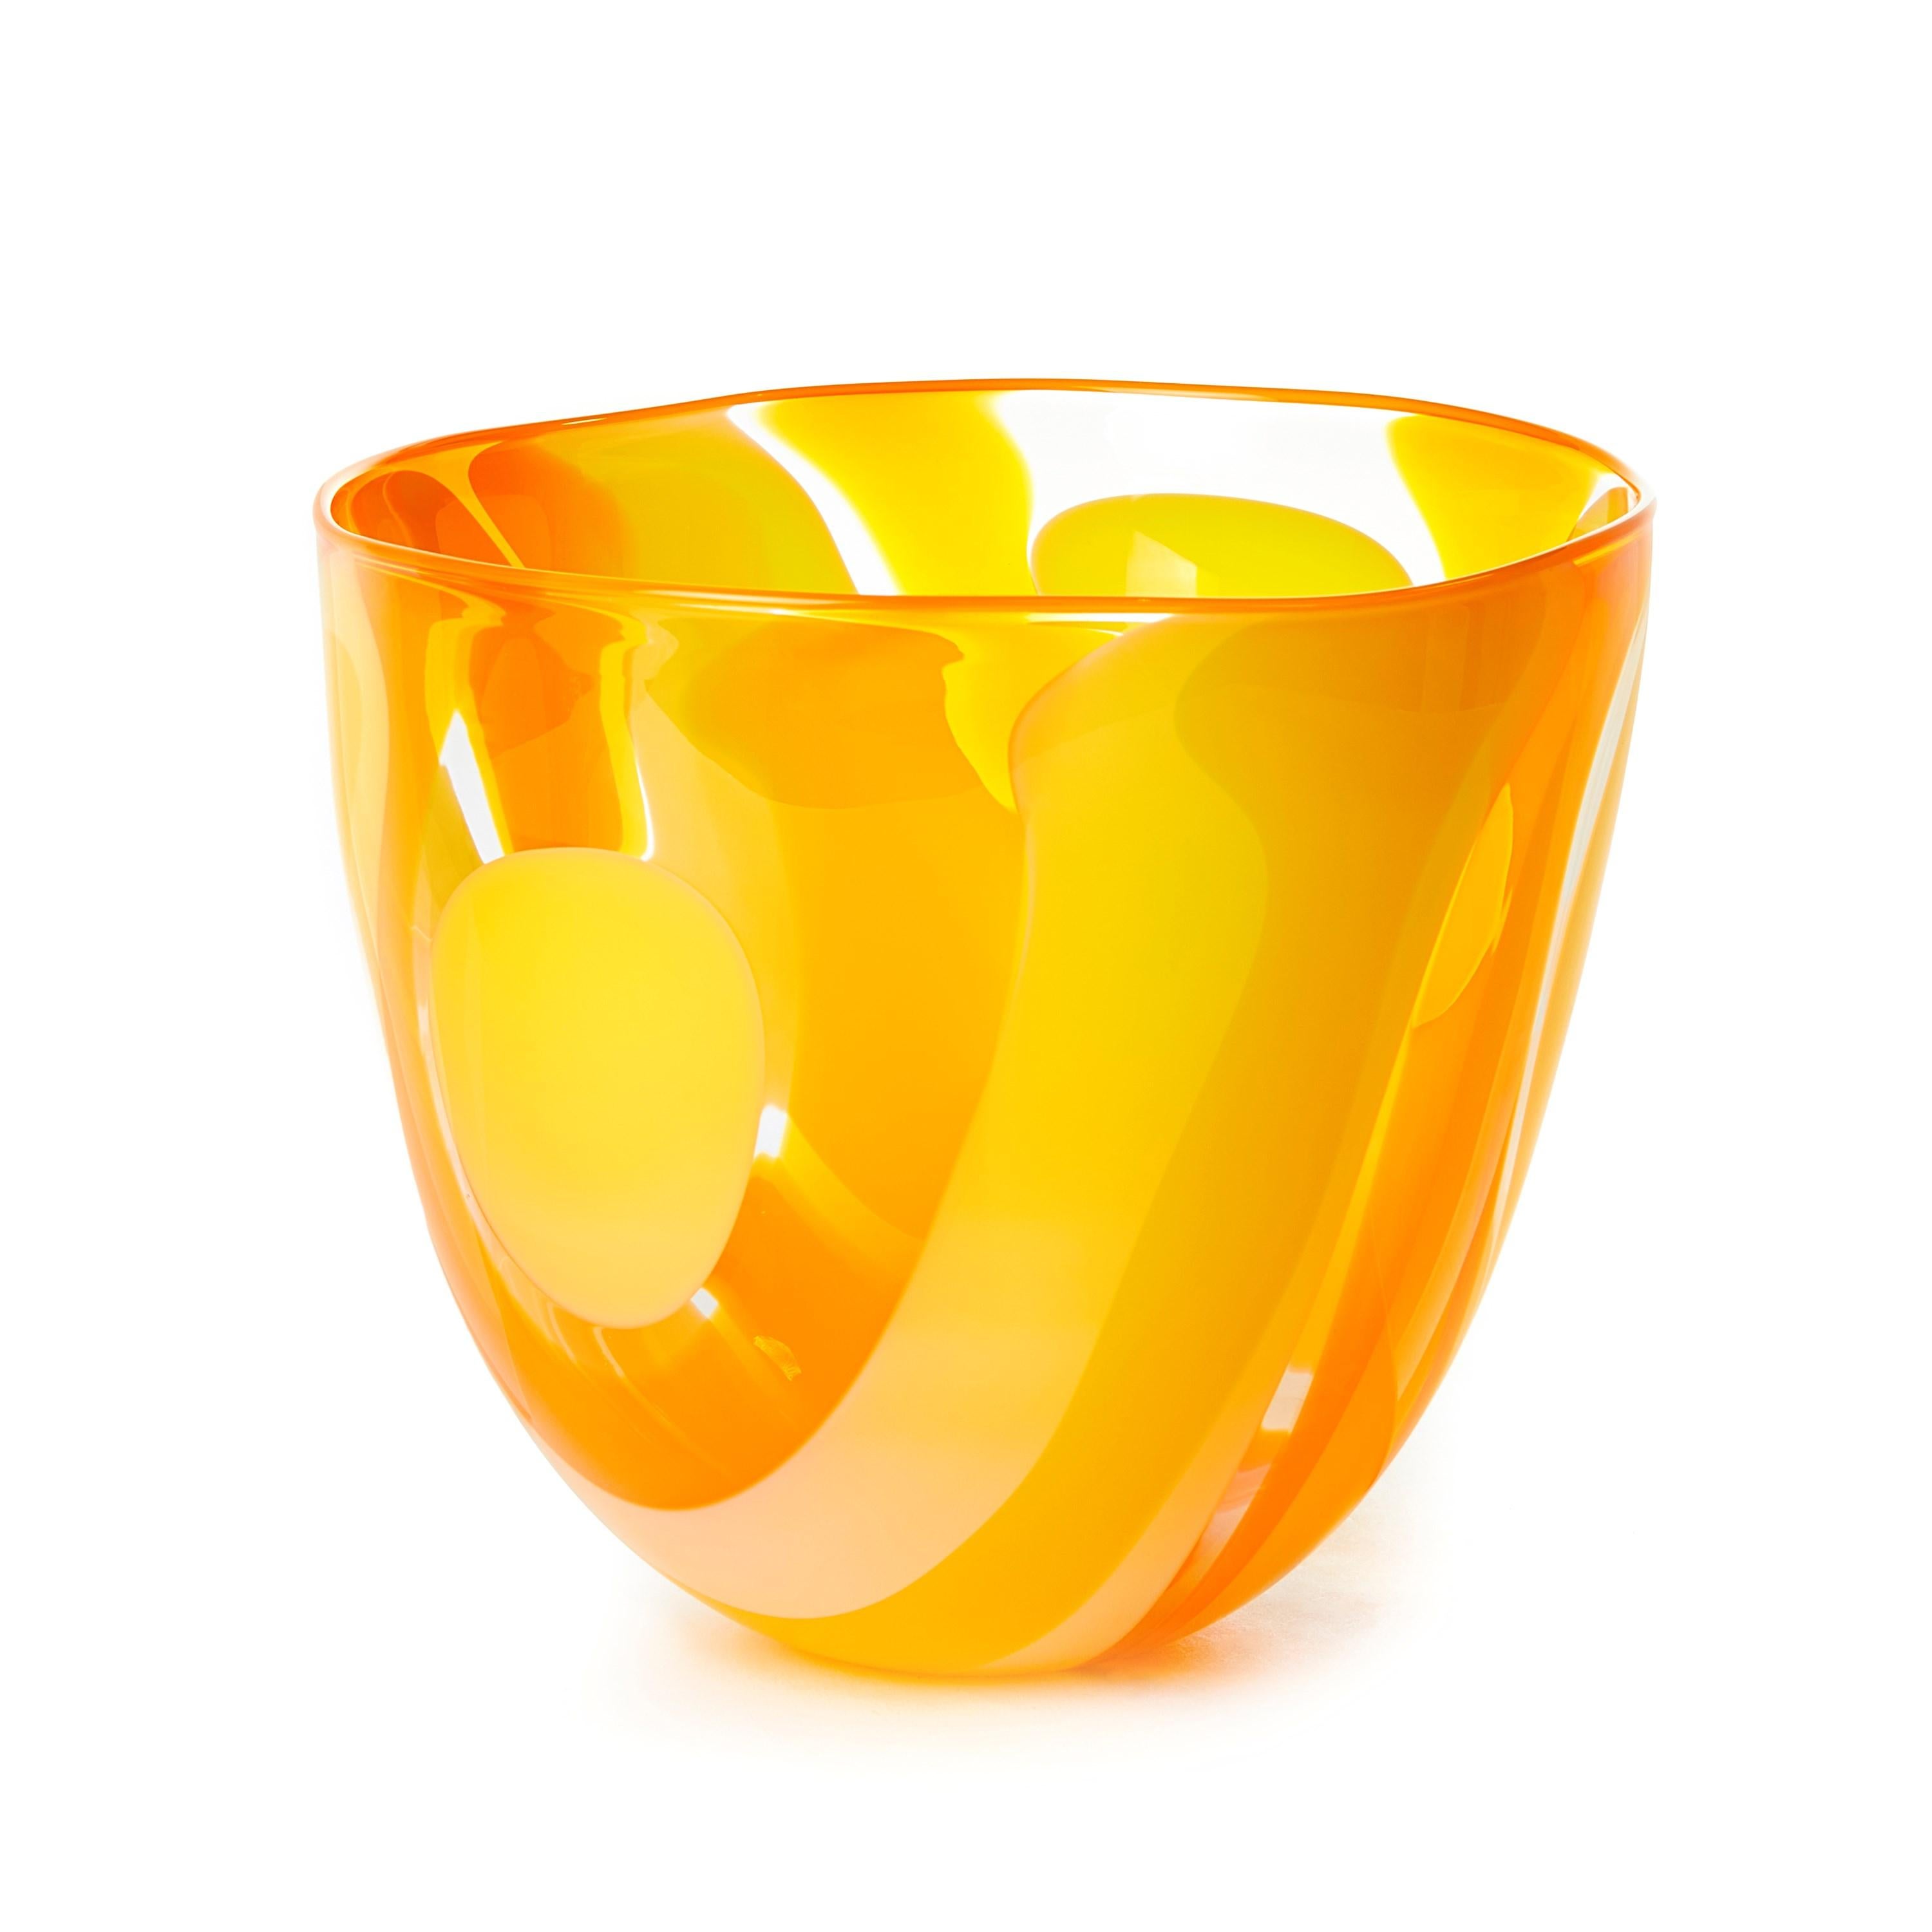 Organic Modern Waves in Yellow and Orange, a Unique Glass Bowl / Centrepiece by Neil Wilkin 